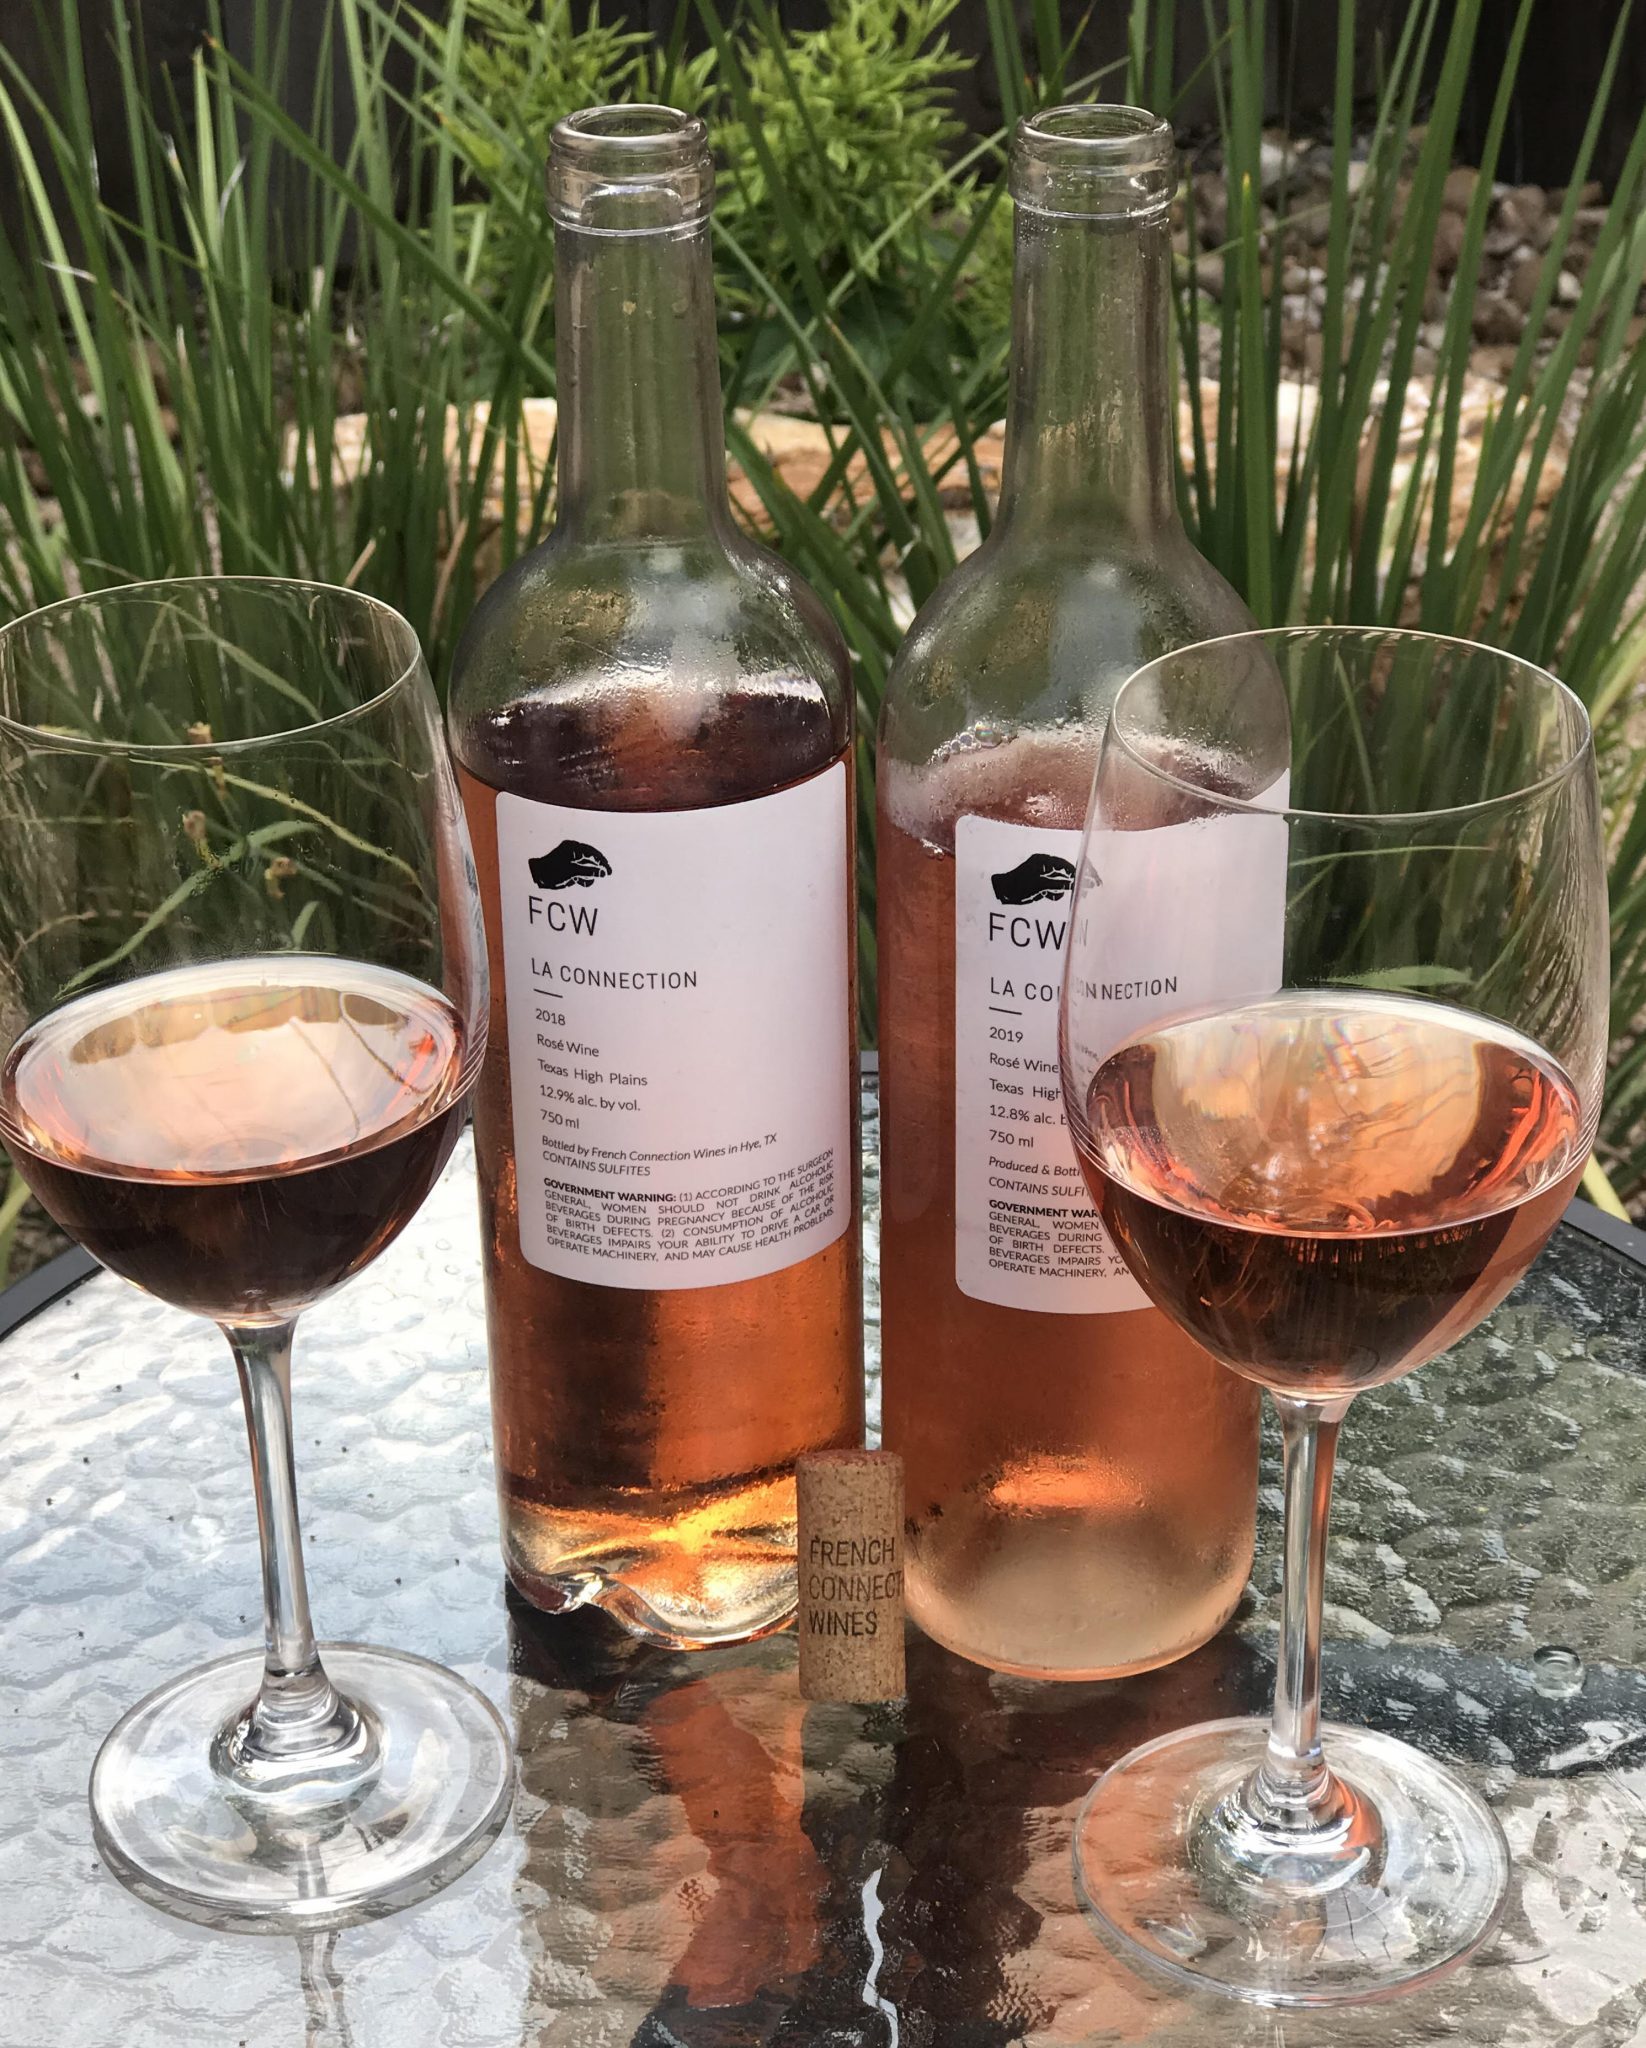 Wine With Lisa It S Rose Time In Texas So Head To French Connection Wines In Hye Located On The 290 Wine Trail Wine With Lisa,How Big Is A King Size Bed Uk